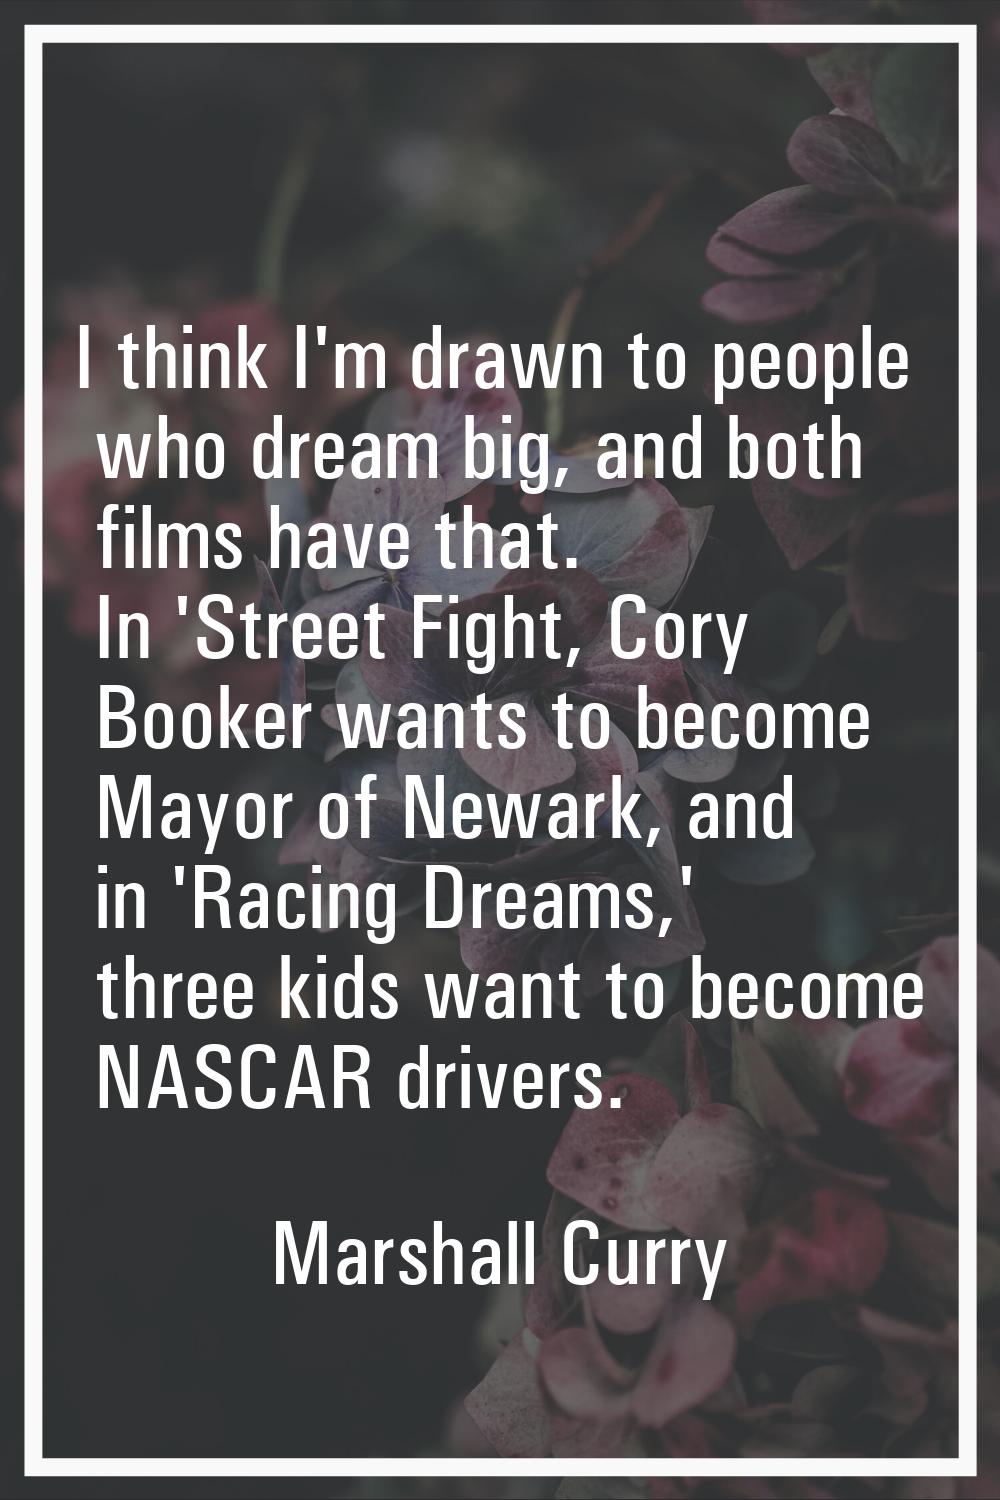 I think I'm drawn to people who dream big, and both films have that. In 'Street Fight, Cory Booker 